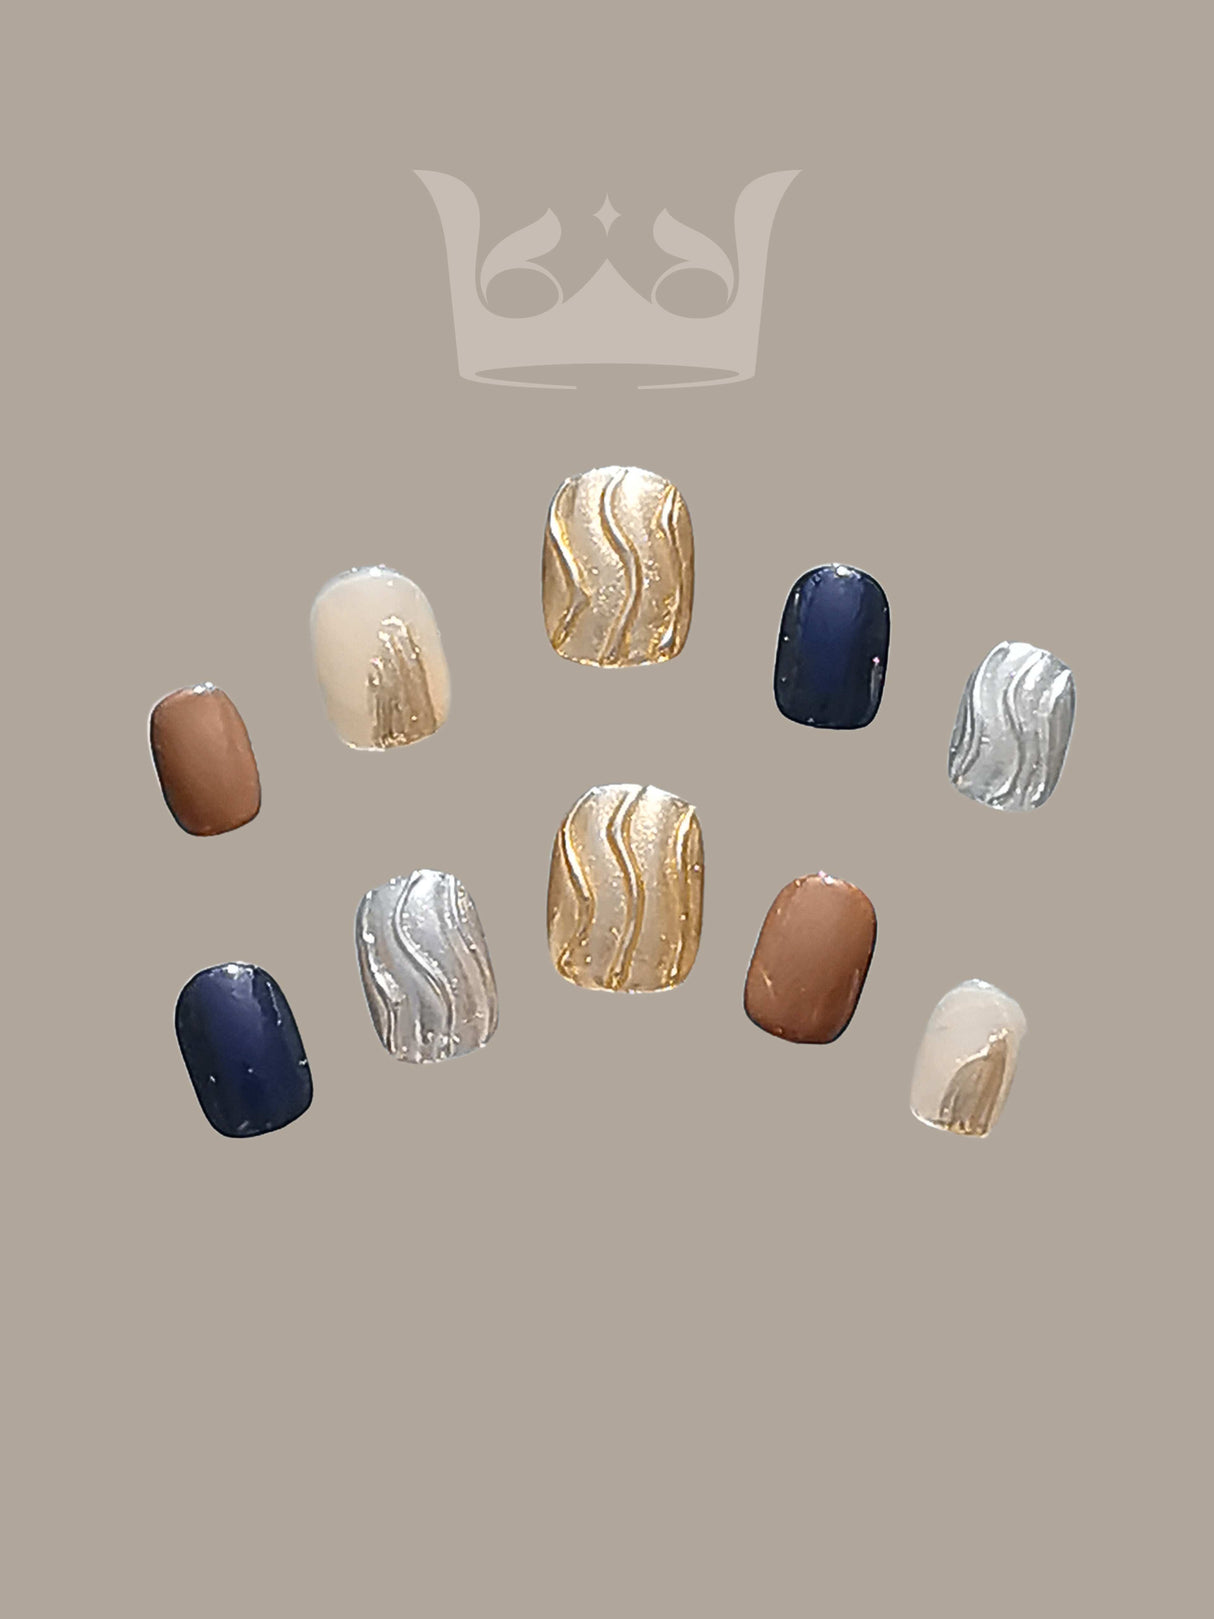 These versatile nails are suitable for formal events, parties, or everyday wear with a fancy color palette, metallic accents, and a trendy marble effect.